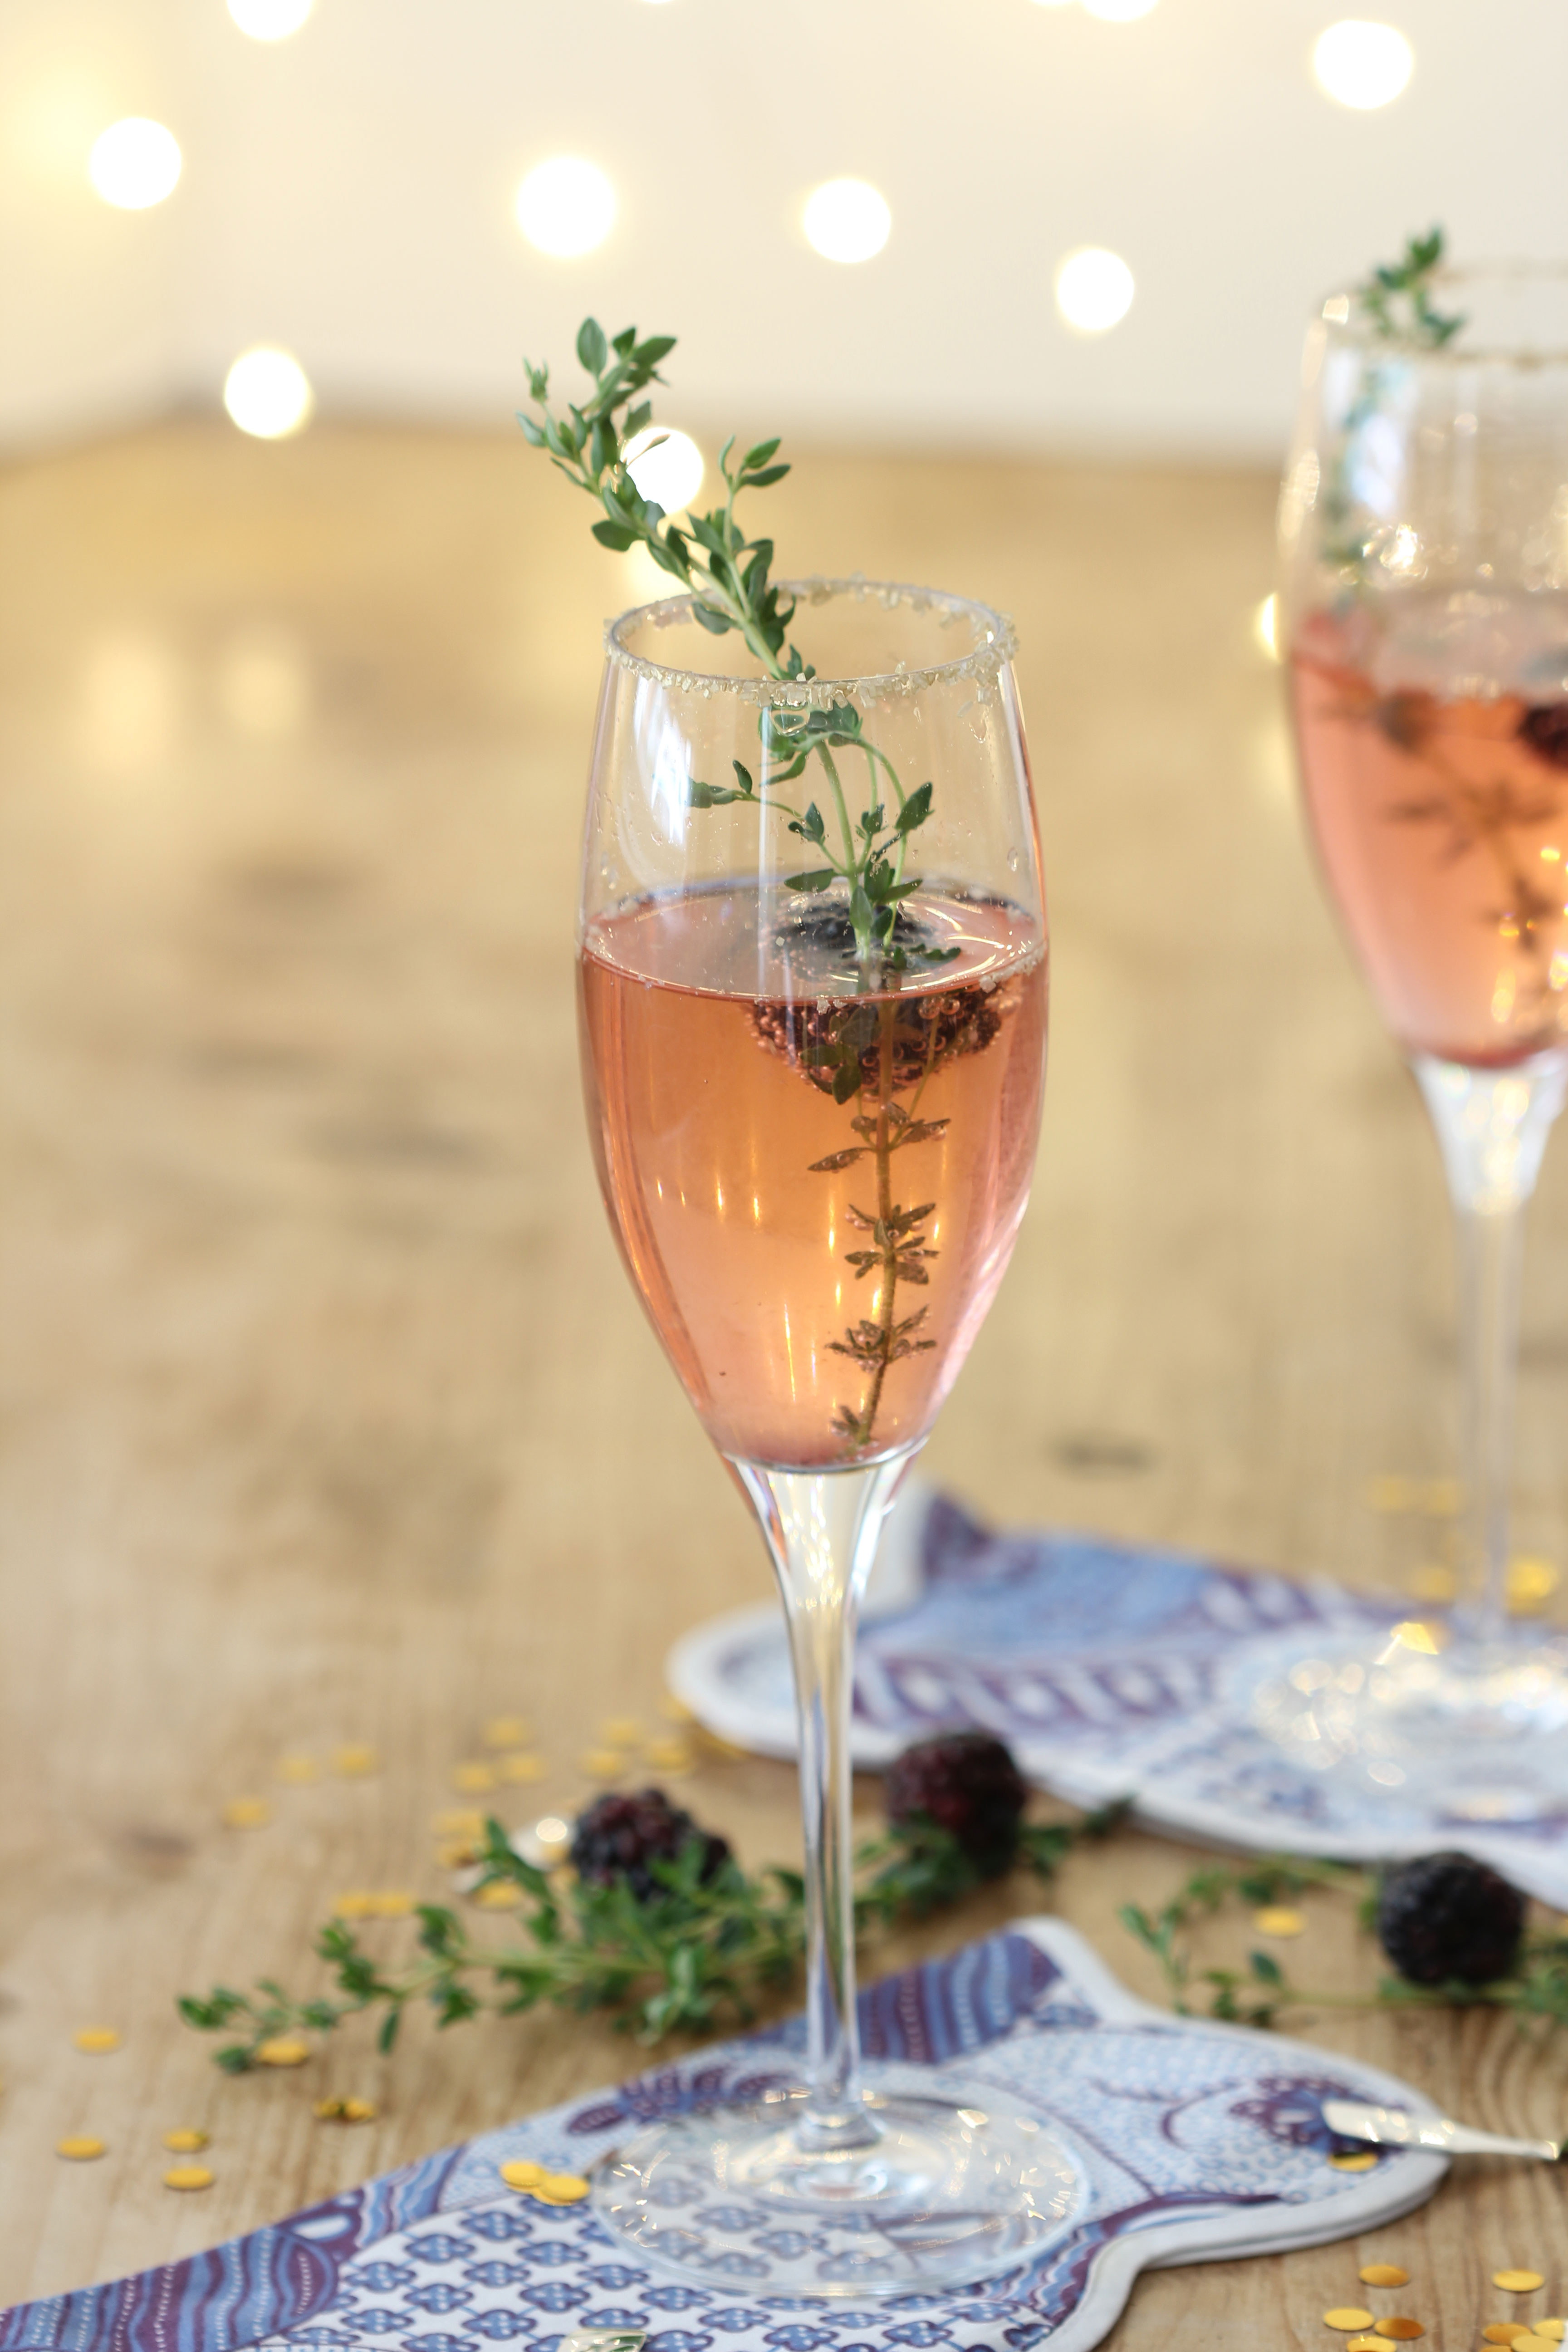 Looking for a fun, festive and delicious Cocktail for the Holidays? This Blackberry Thyme Champagne Cocktail is always a hit!